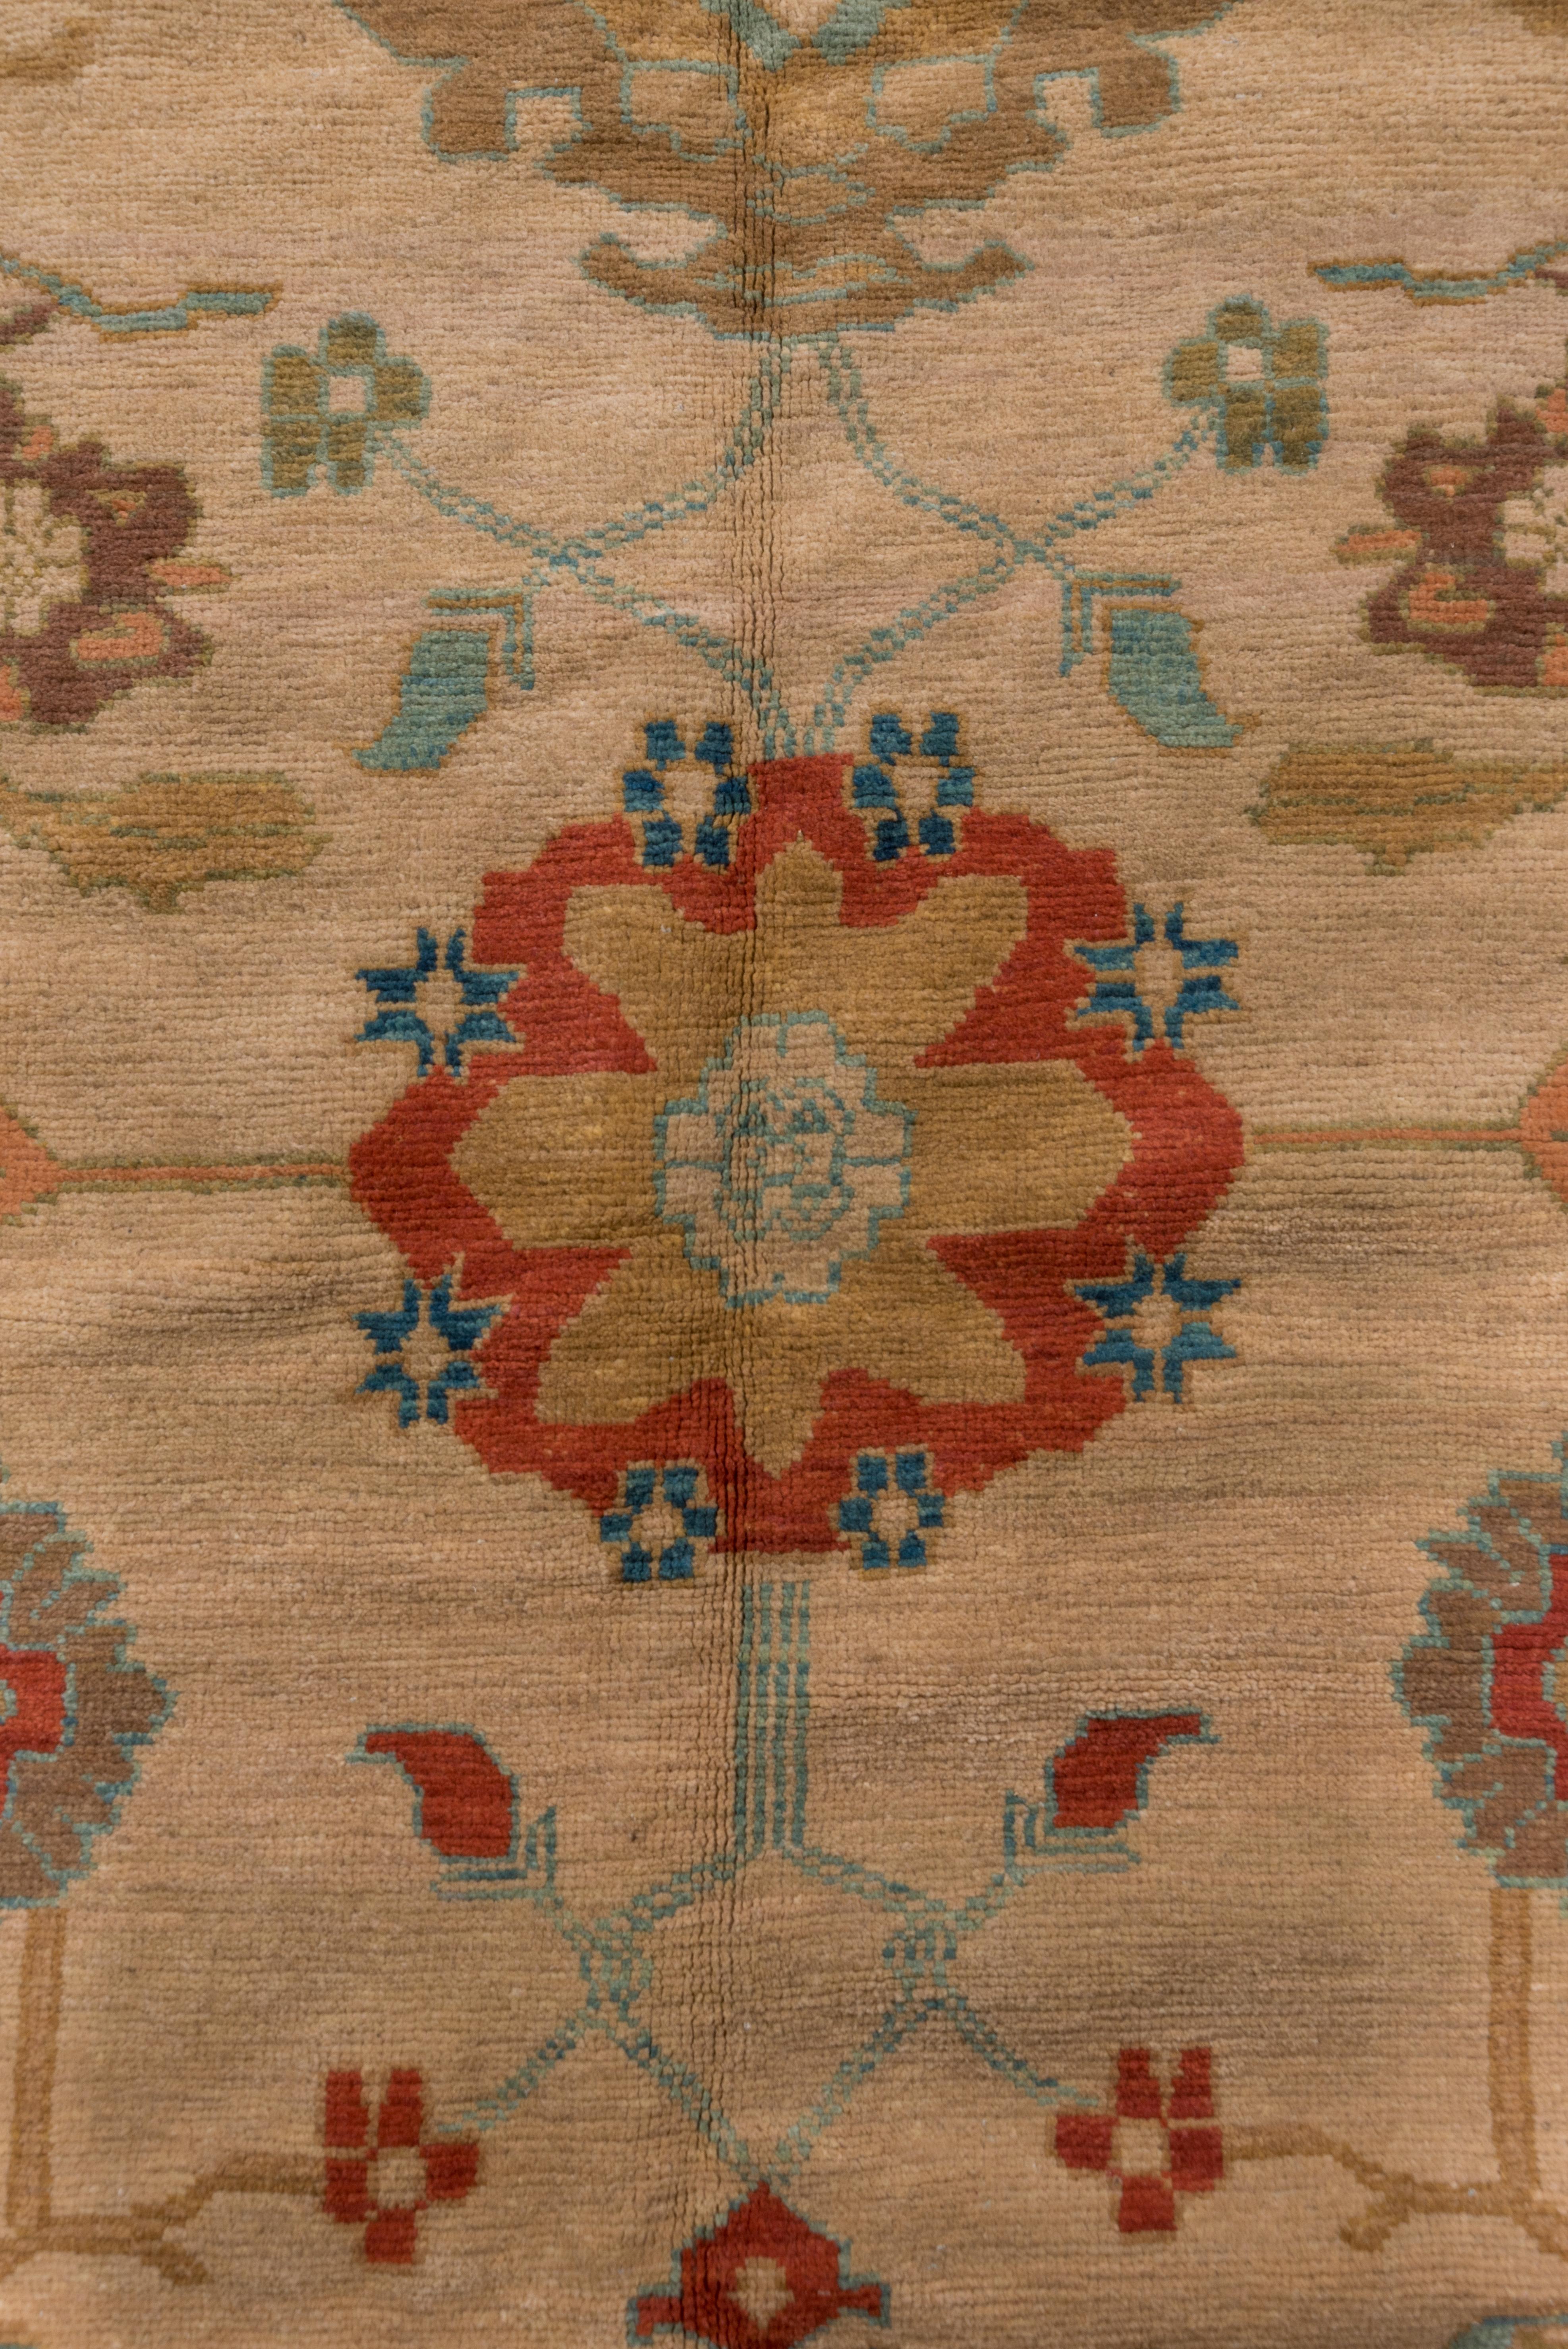 On an oatmeal ground, the pattern is organized into three columns with symmetric blue petal palmettes in a central column while leafy rosettes and winged cartouches appear in the side columns. The tonally en suite border displays rosettes and paired